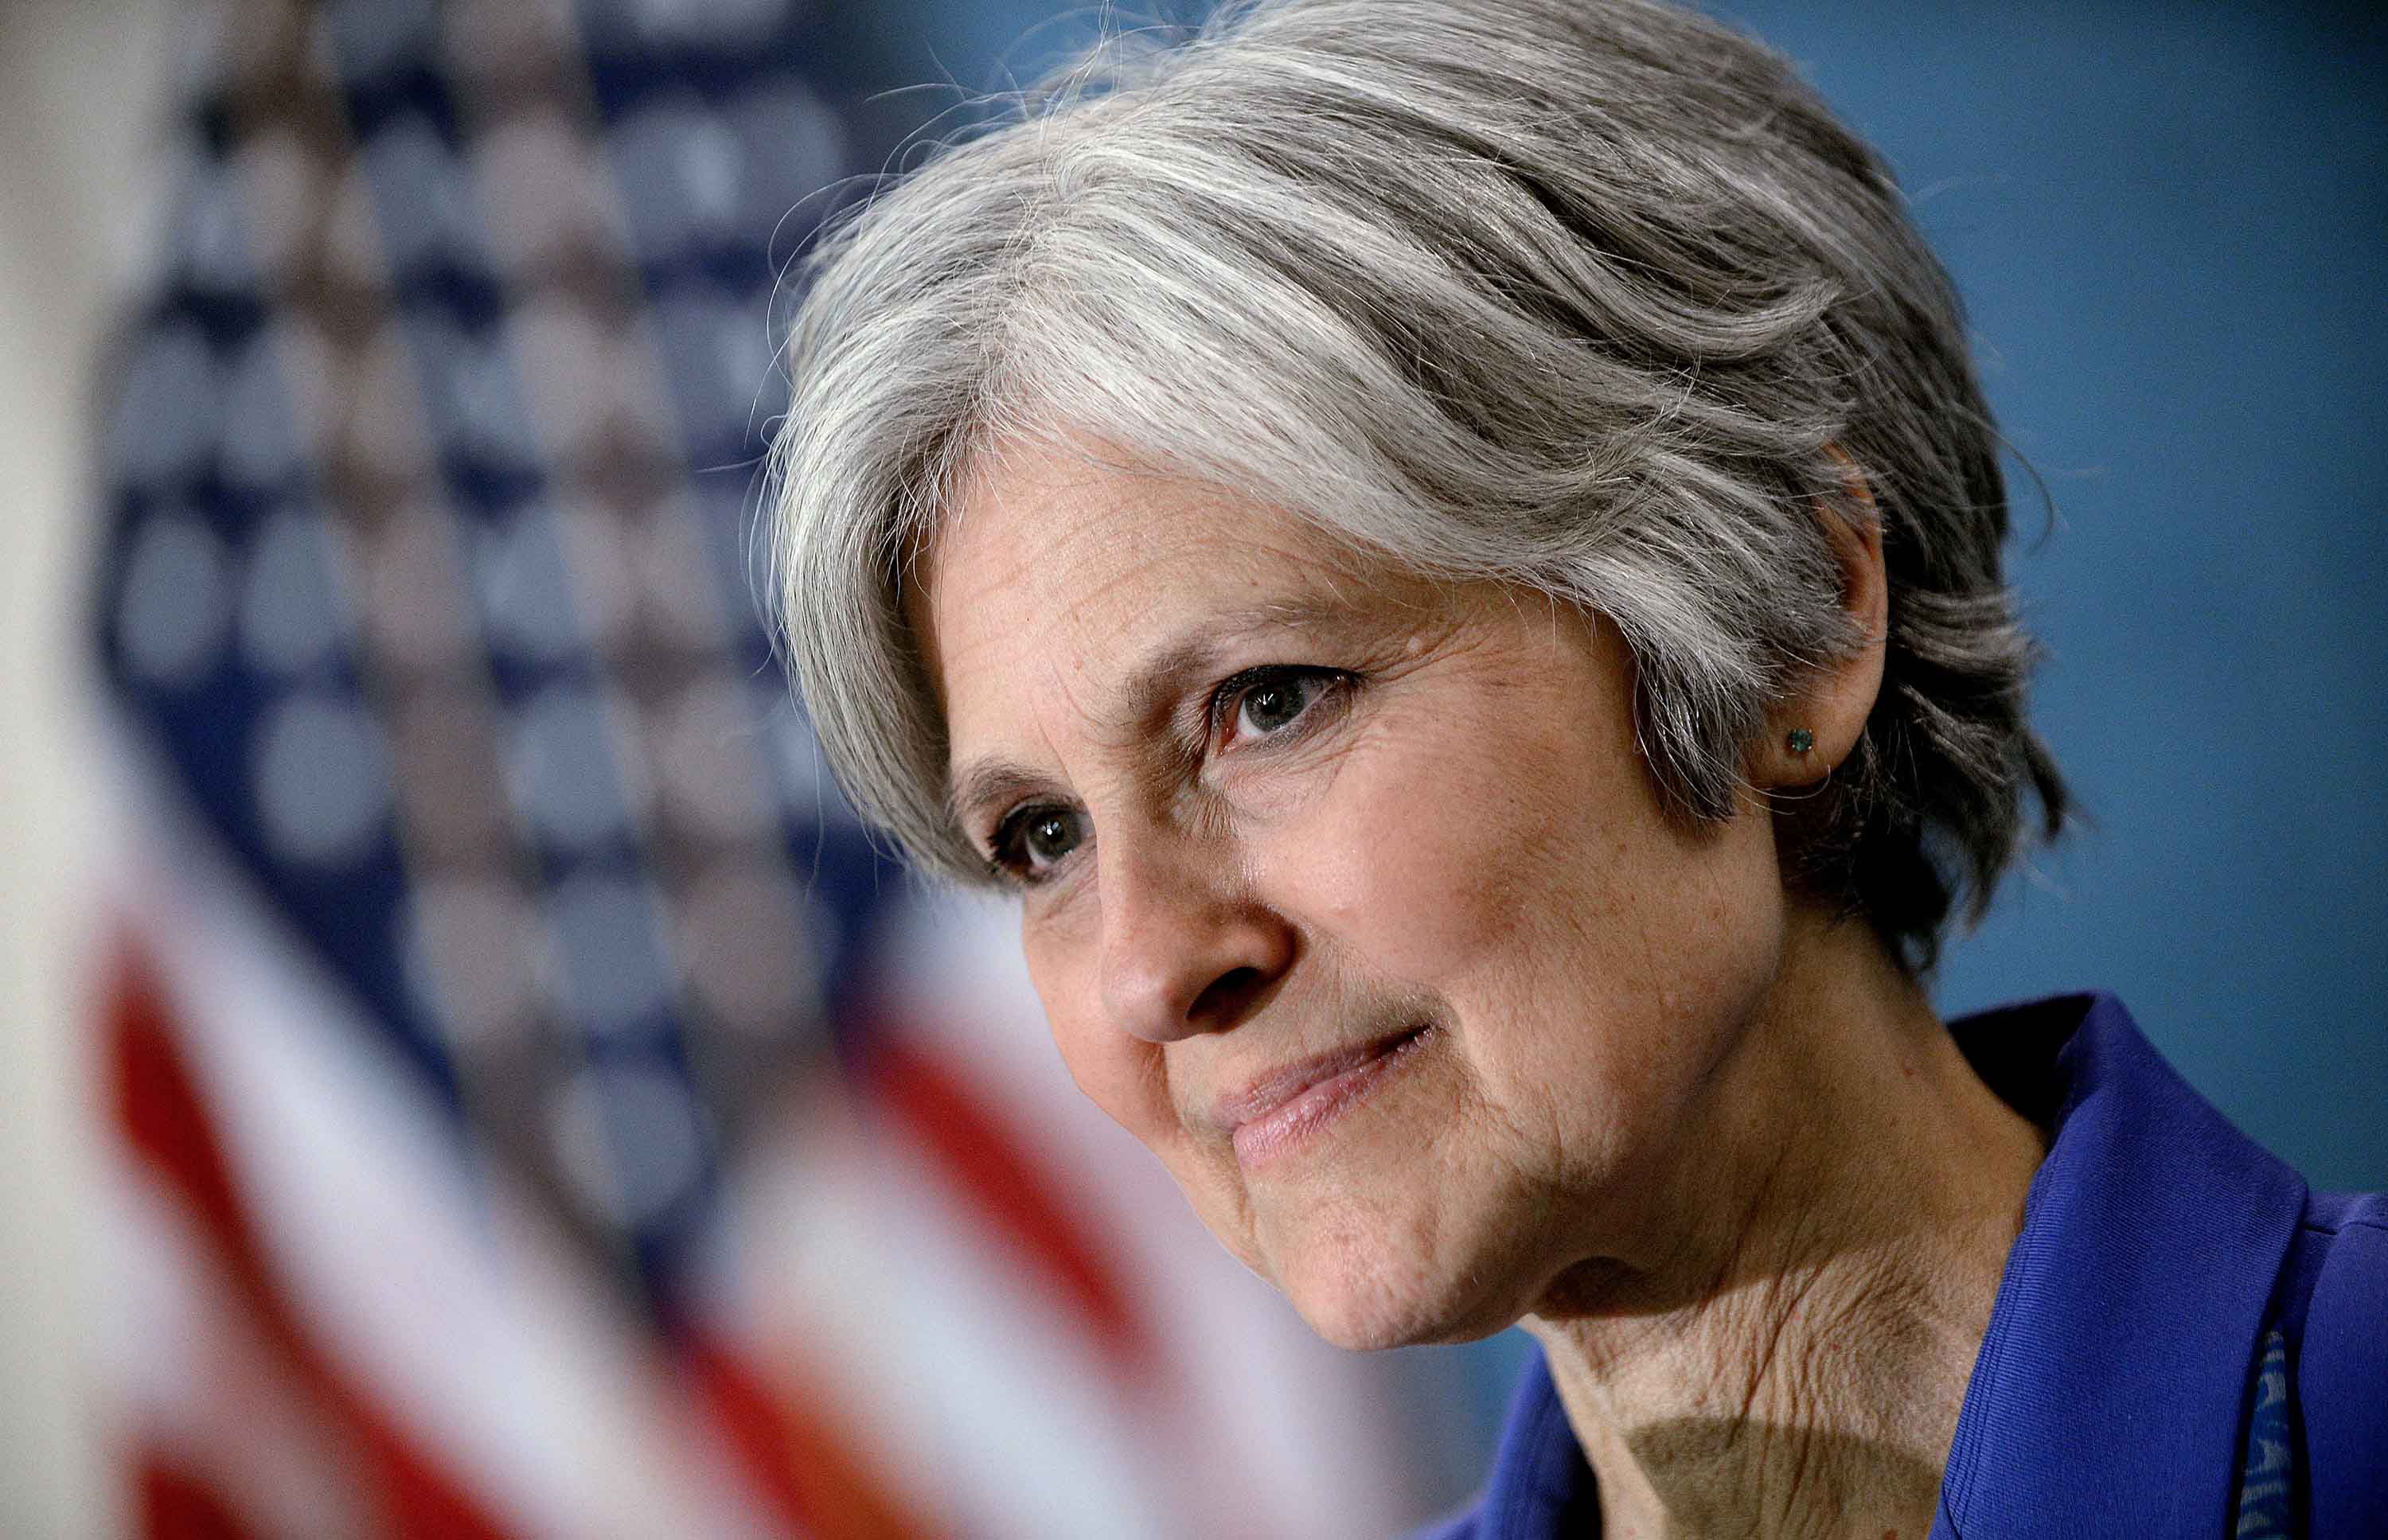 Green Party presidential nominee Jill Stein announces the formation of an exploratory committee to seek the Green Party's presidential nomination again in 2016 during an event at the National Press Club Feb. 6, 2015 in Washington, D.C. (Olivier Douliery/Abaca Press/TNS)